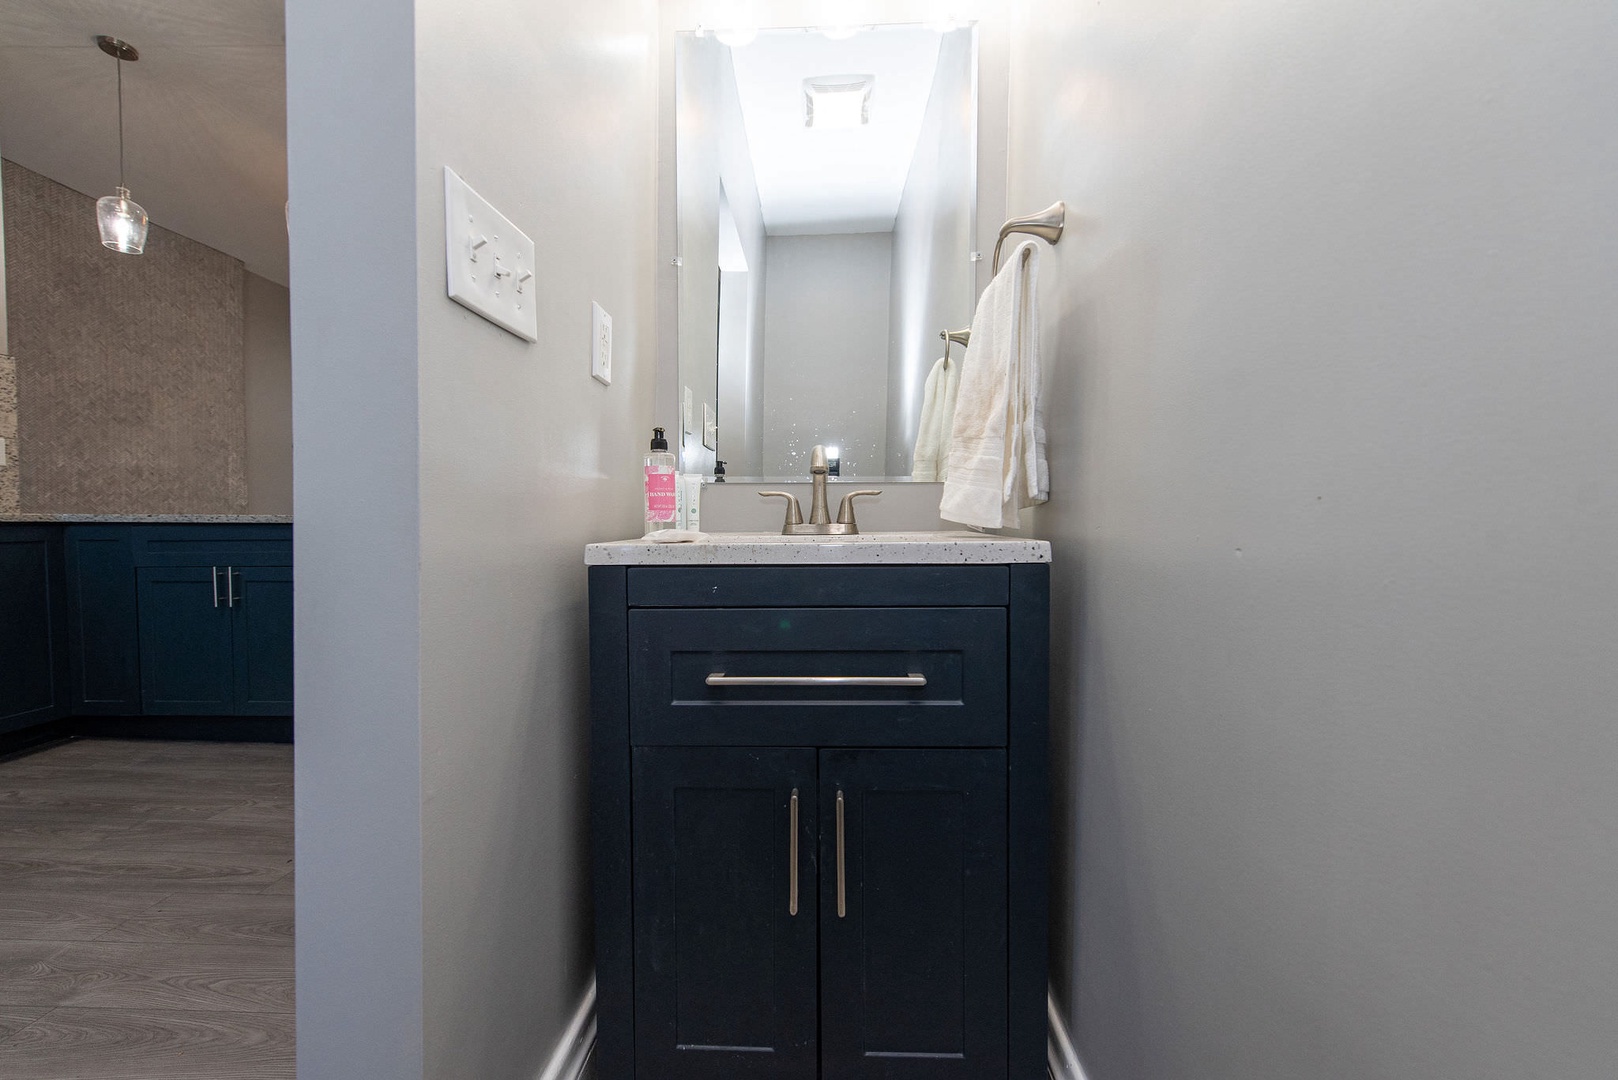 Suite 2 – A convenient half bath is tucked away on the main level